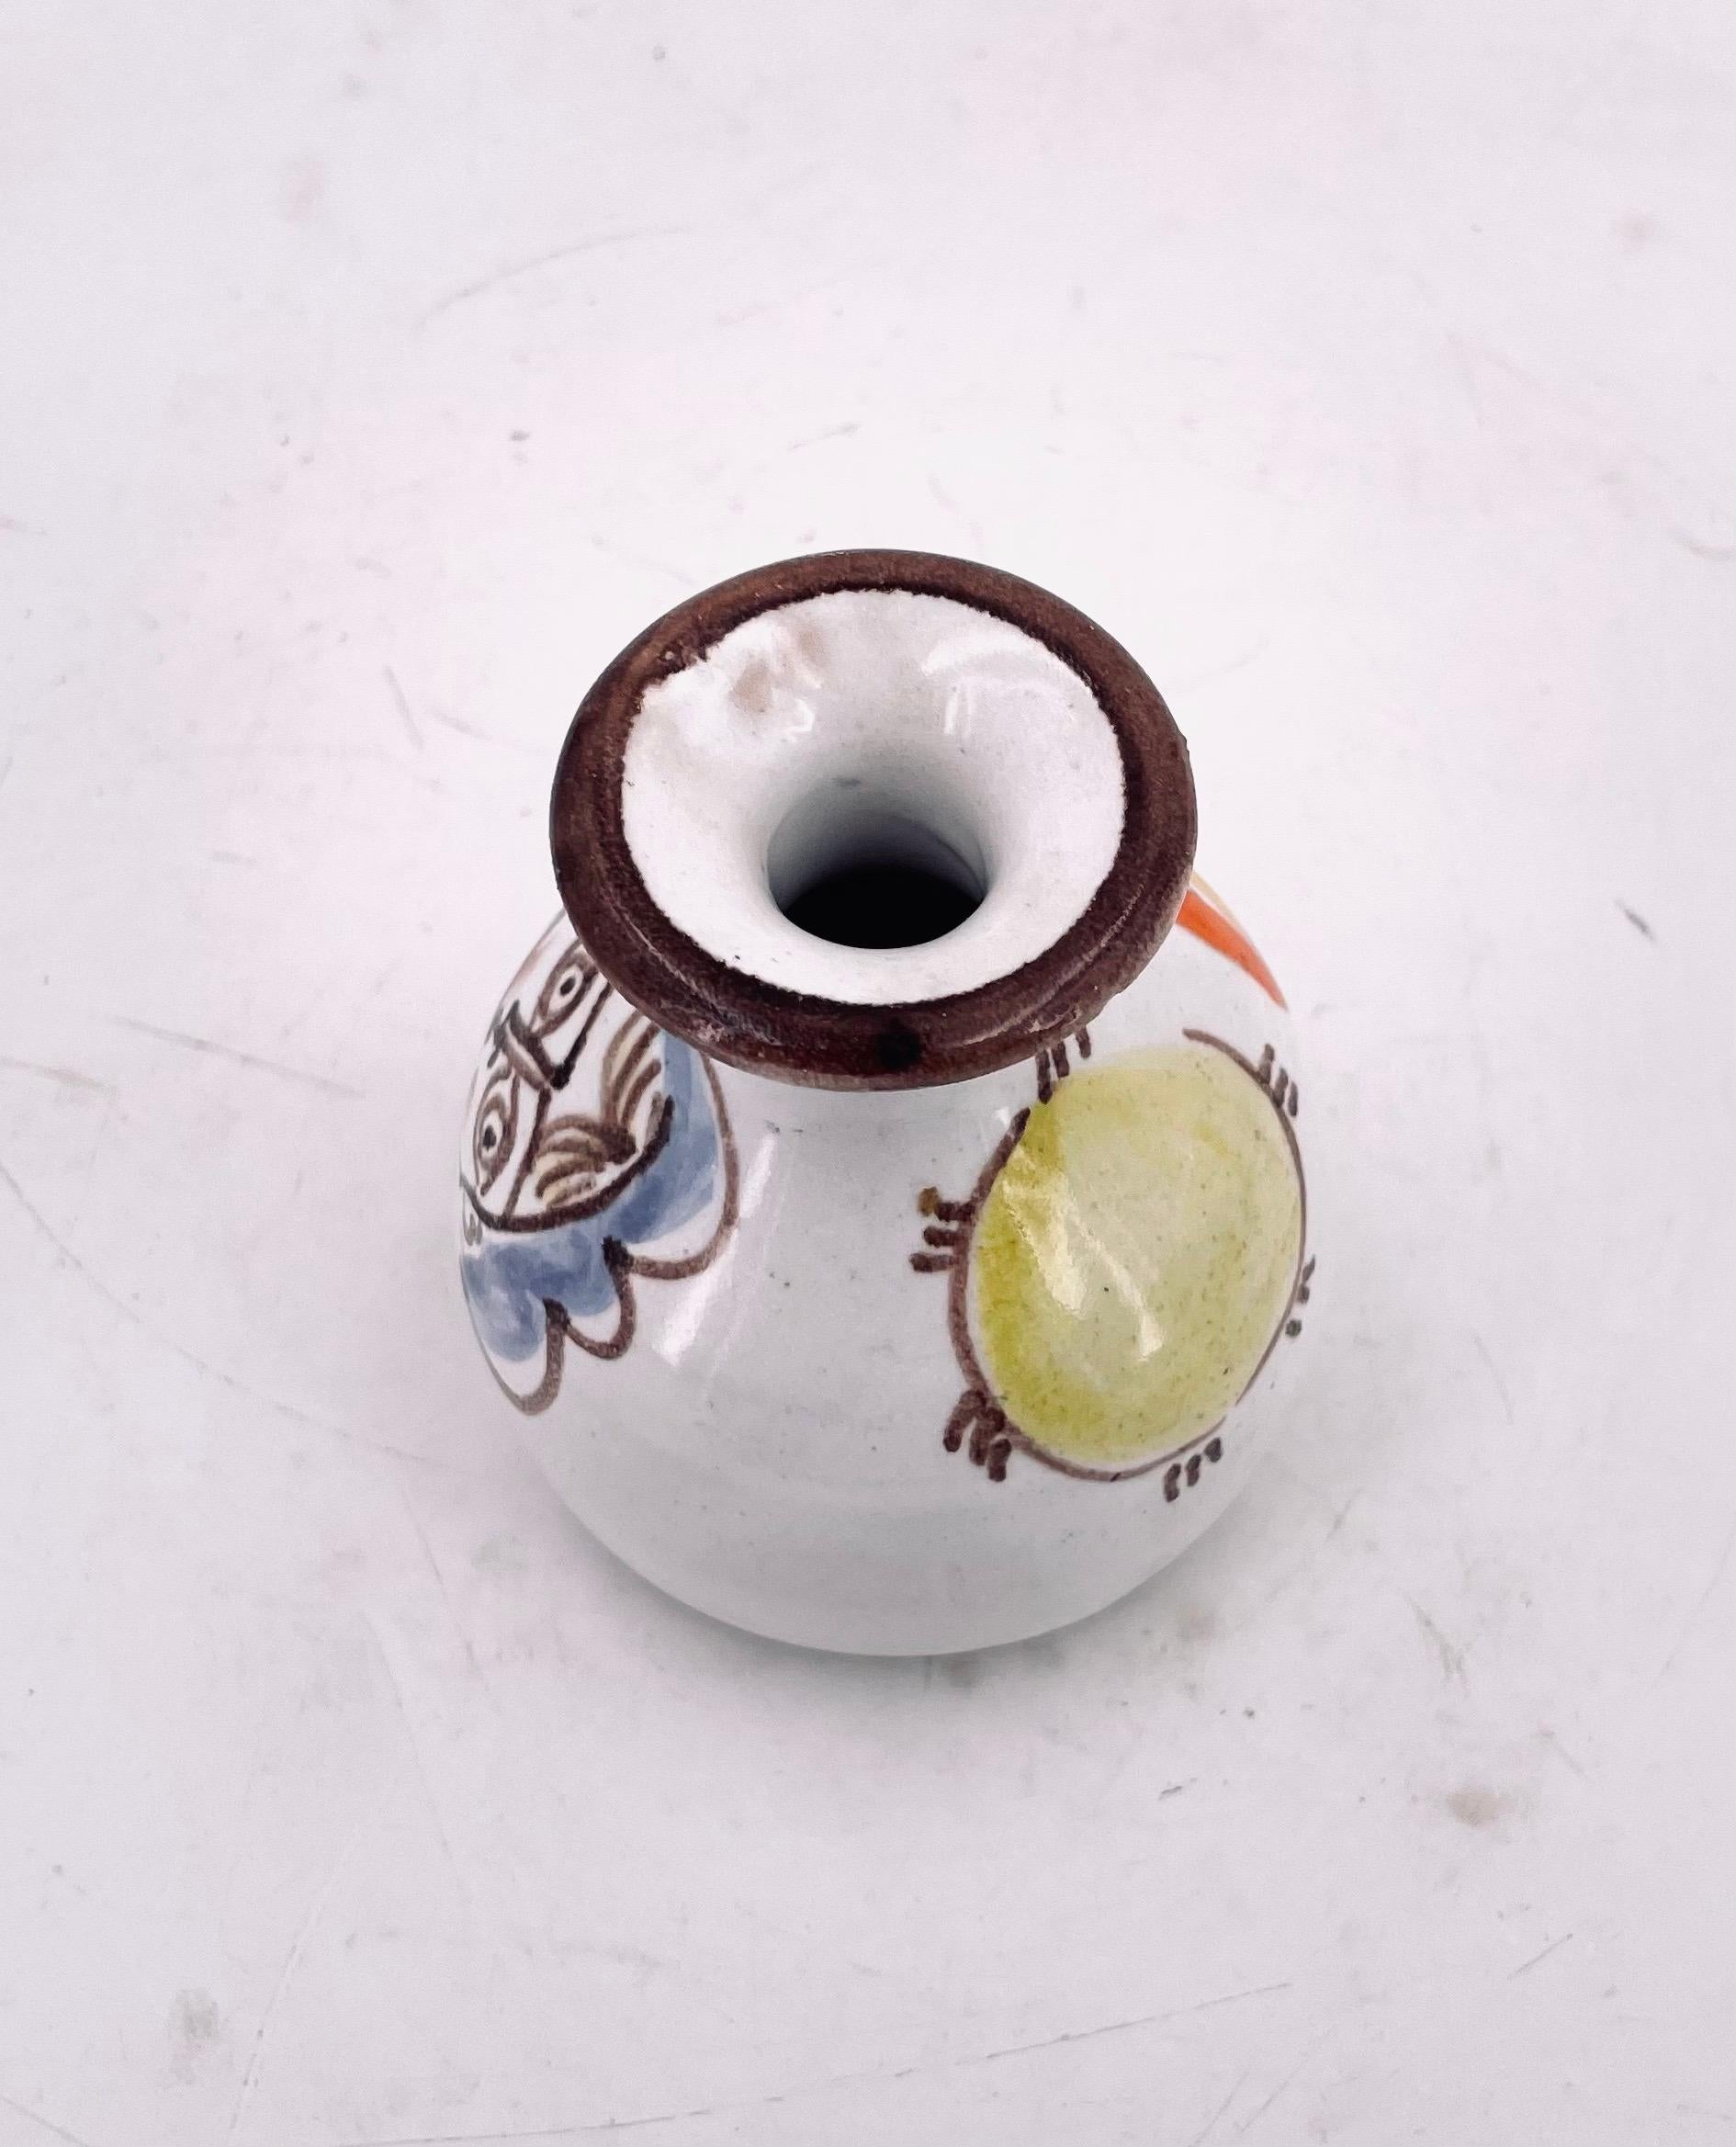 Beautiful ceramic small vase by famous artist DeSimone, hand-painted, circa the 1950s, made in Italy. Nice colors and great condition no chips or cracks. circa 1965.